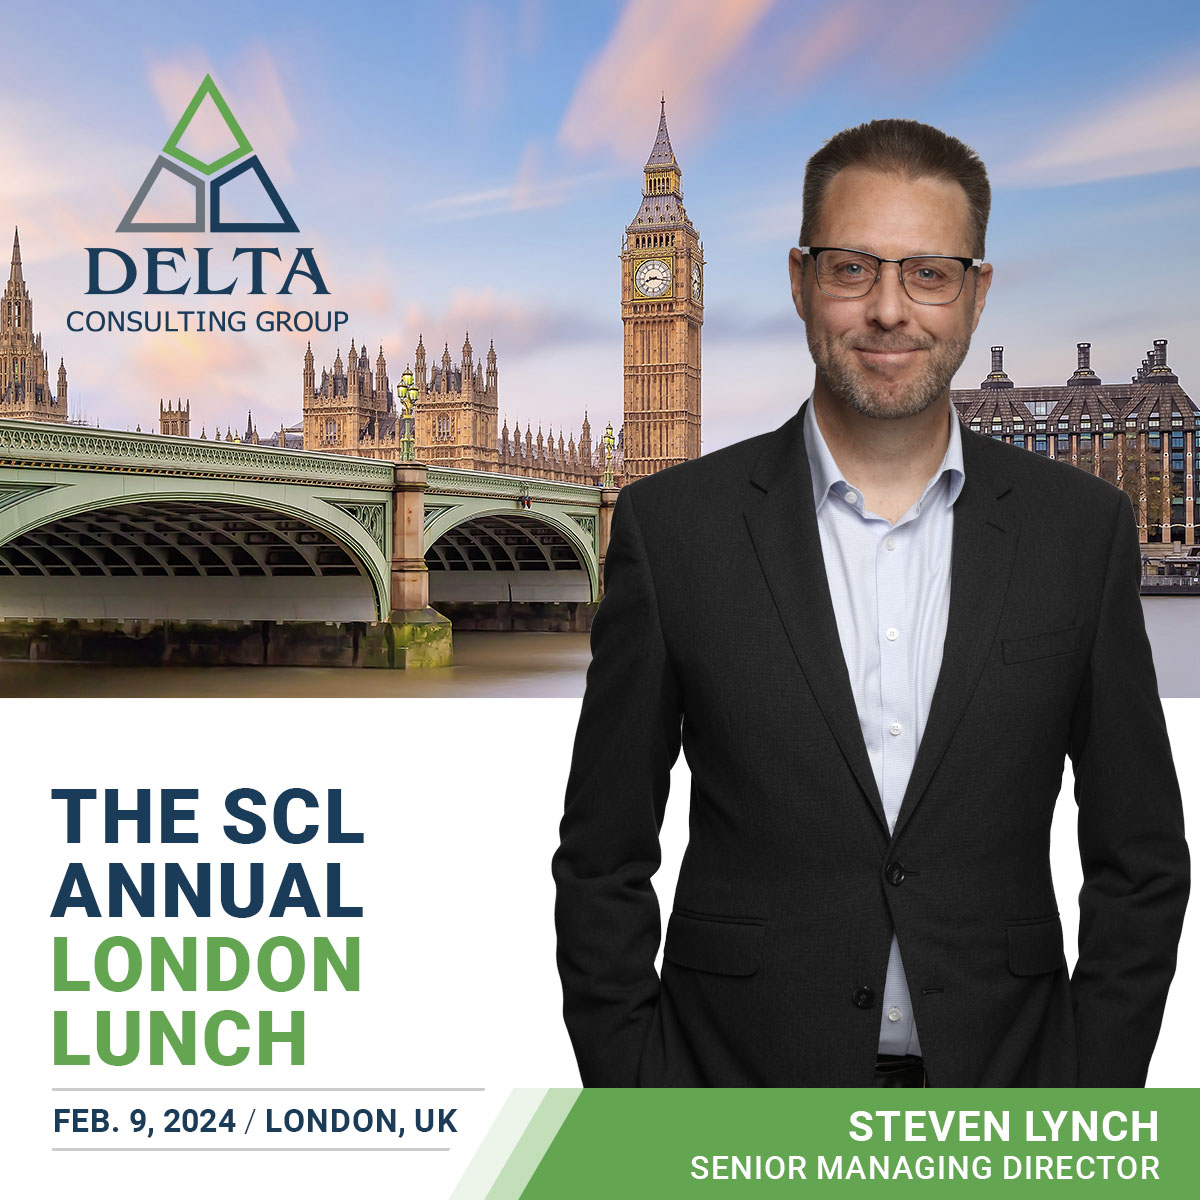 The SCL Annual London Lunch